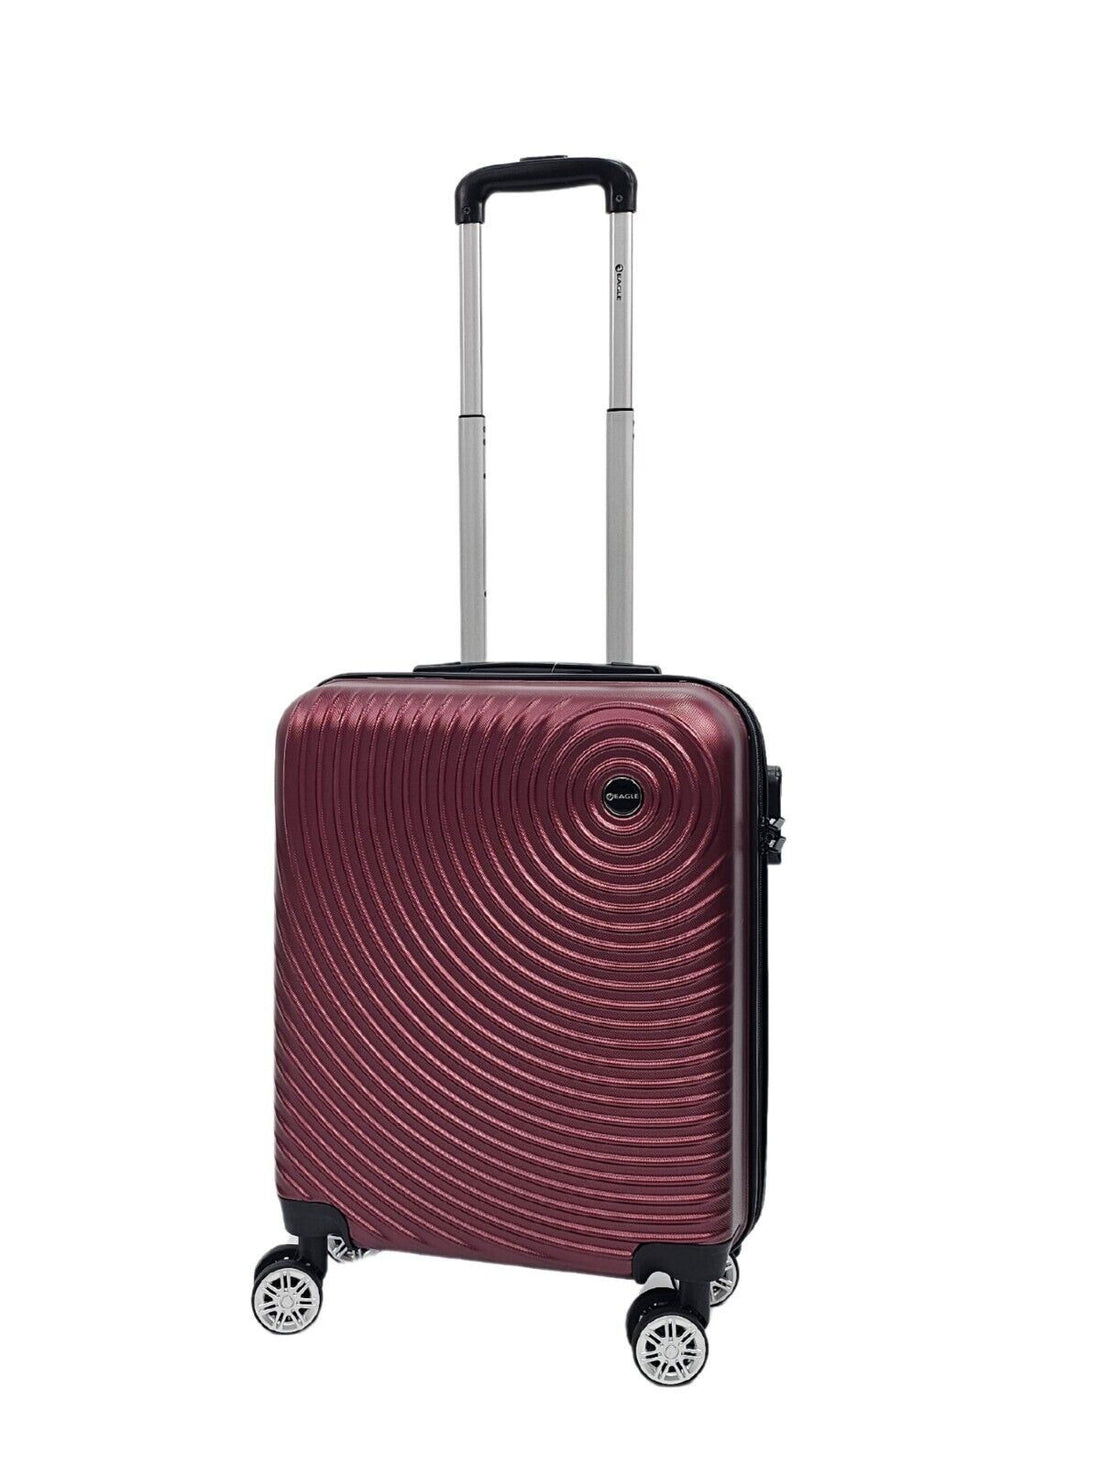 Brookside Cabin Hard Shell Suitcase in Burgundy